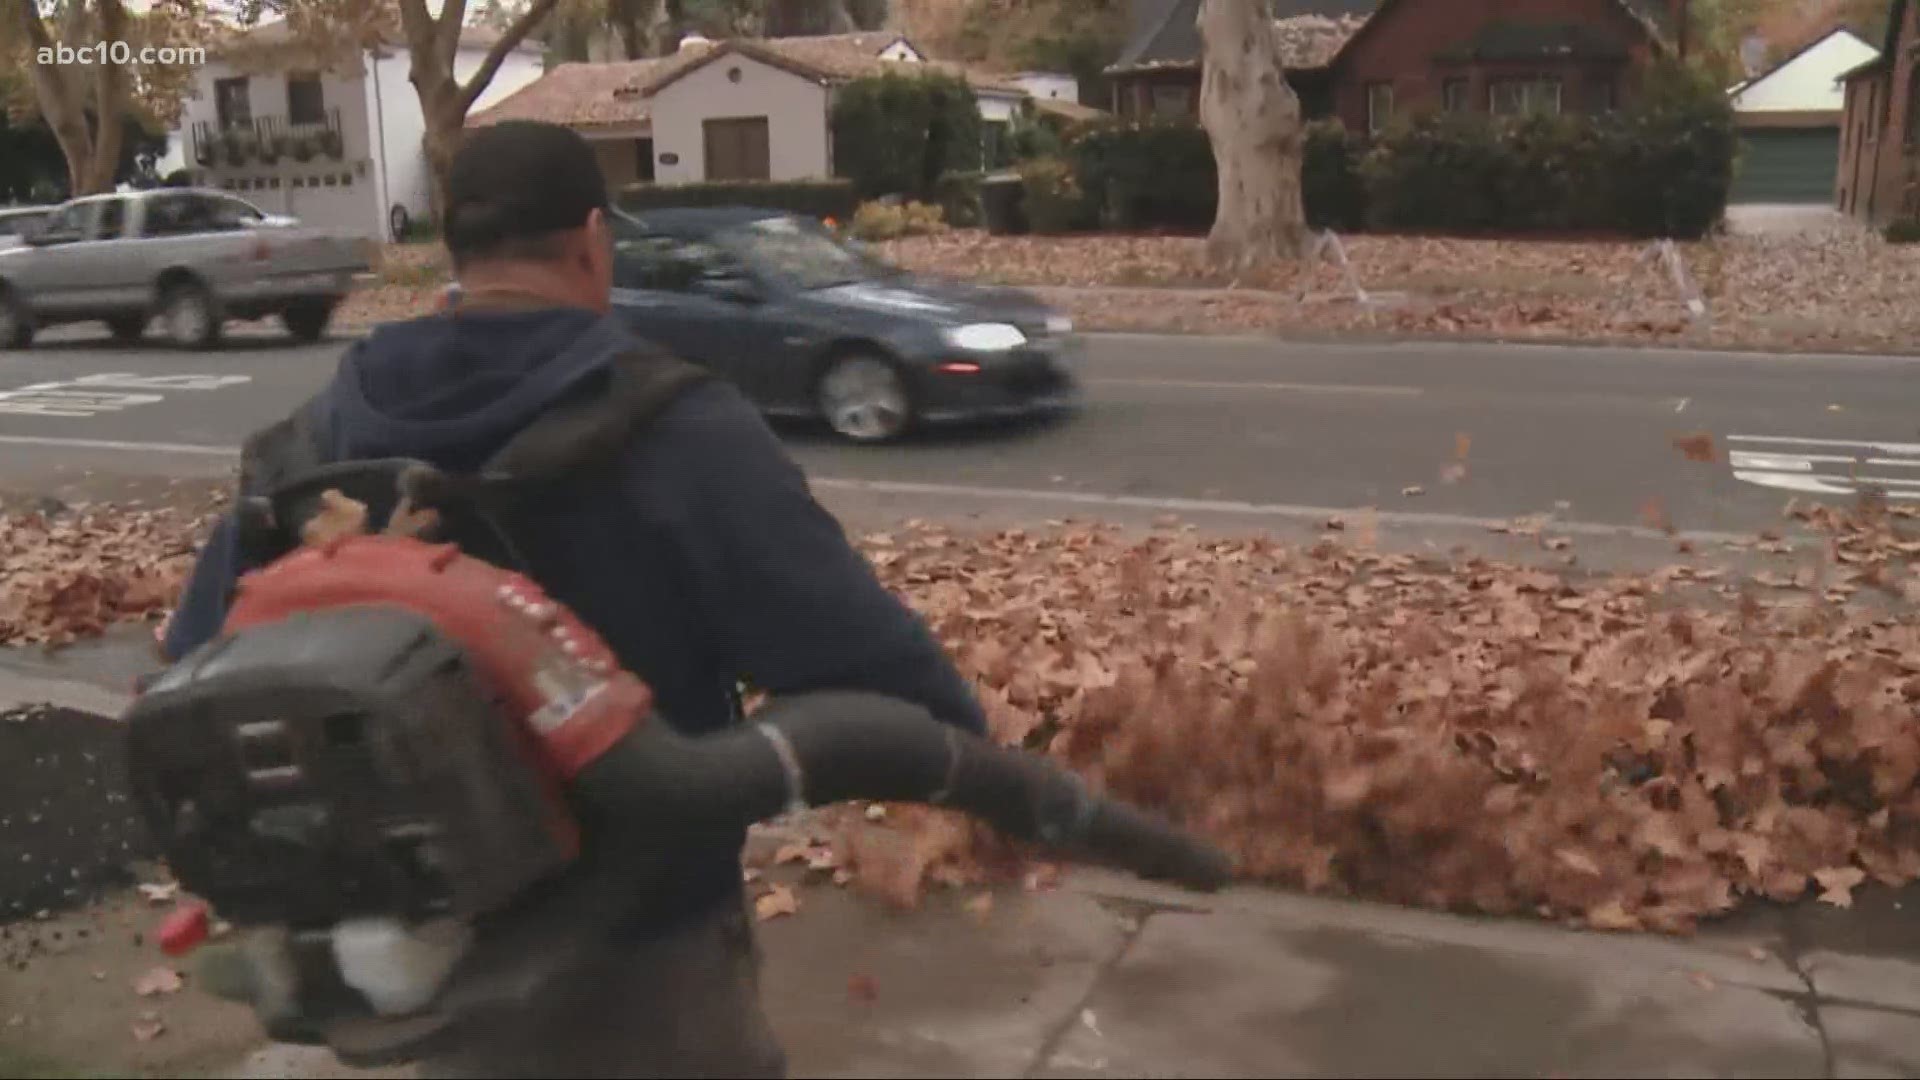 The City of Davis' Natural Resources Commission says leaf blowers add to the already bad air quality due to how they kick up ash and dust back into the air.